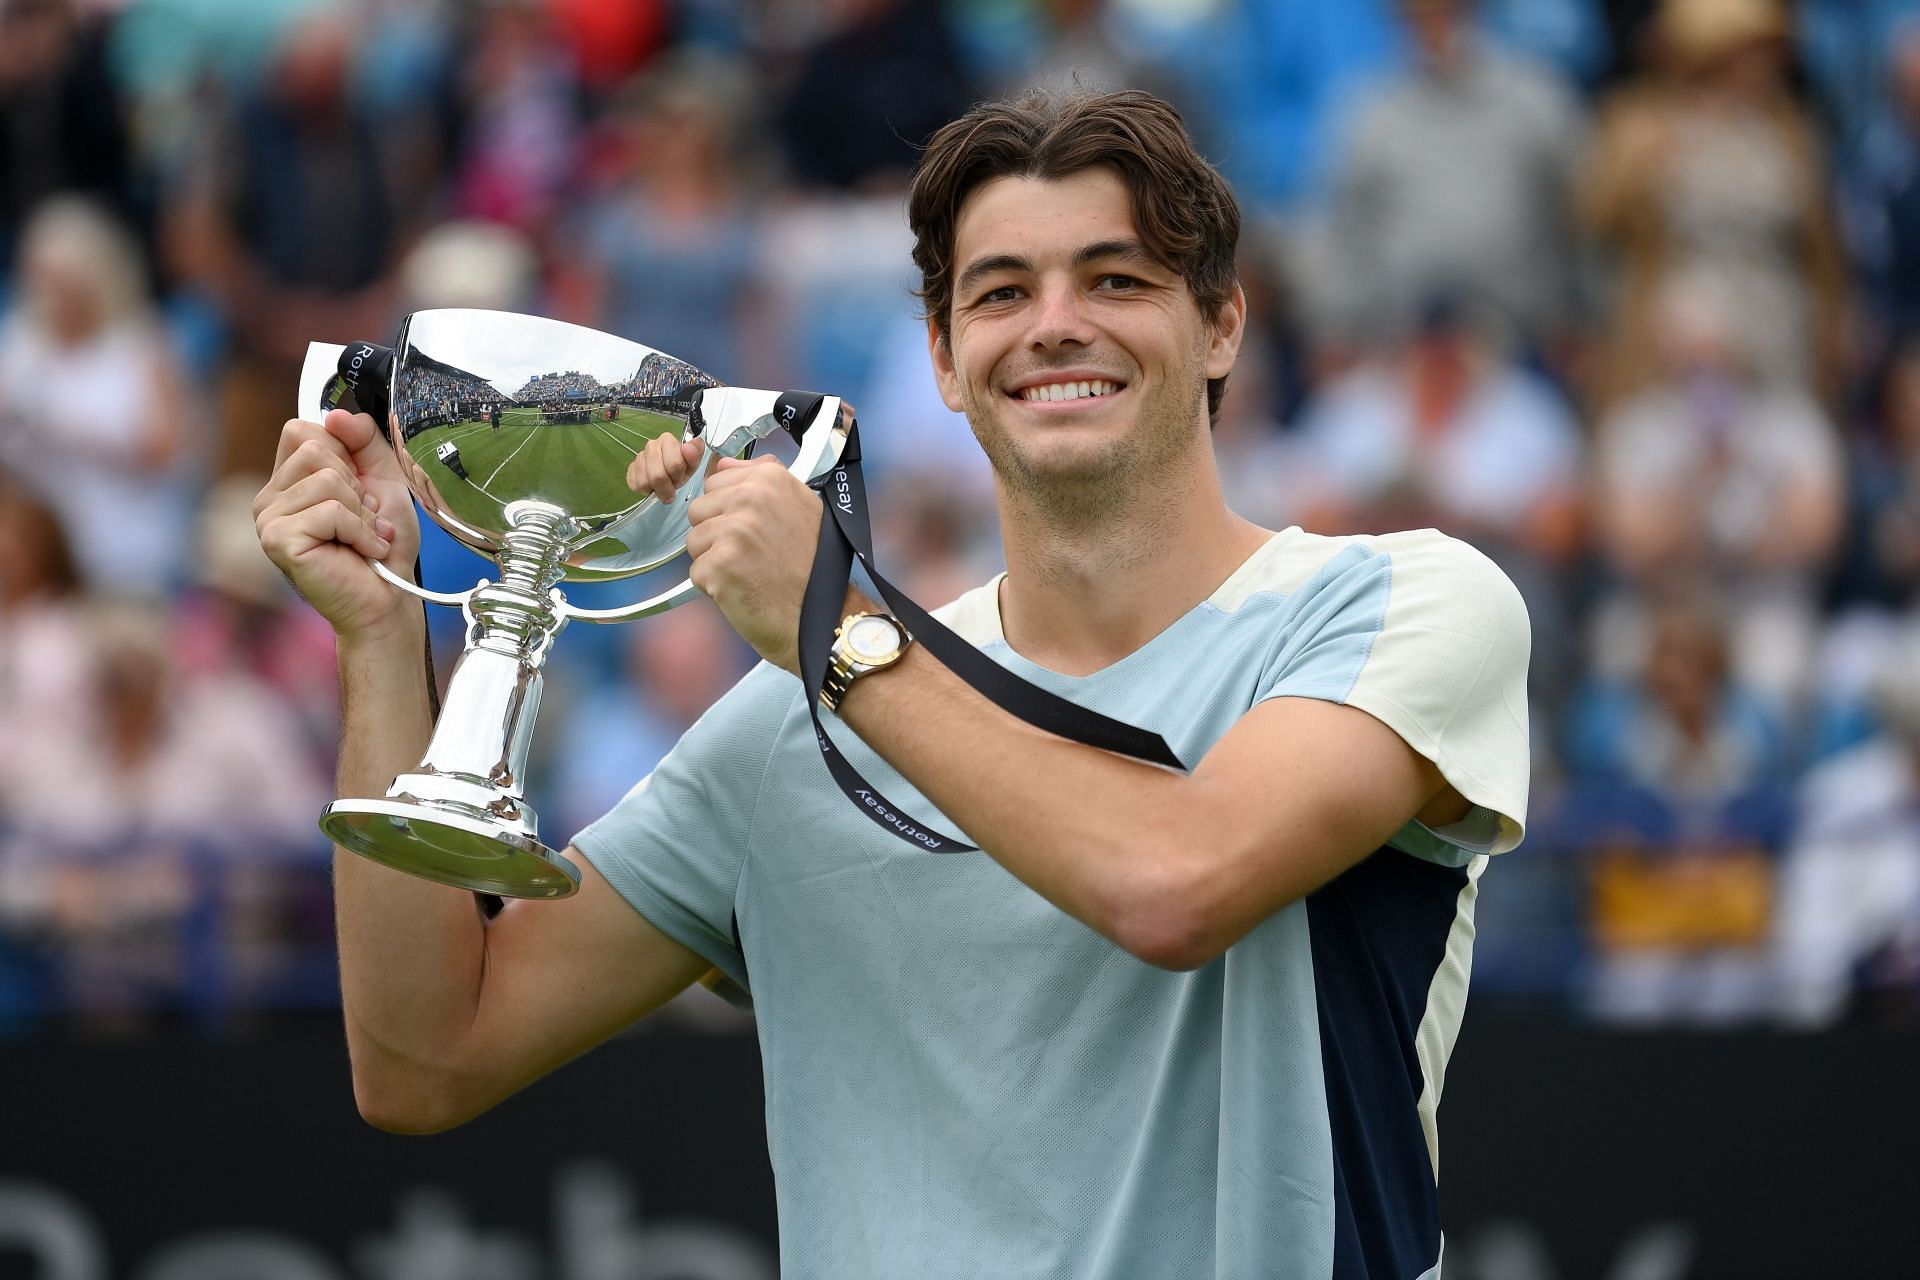 Fritz won the 2022 Rothesay International in Eastbourne